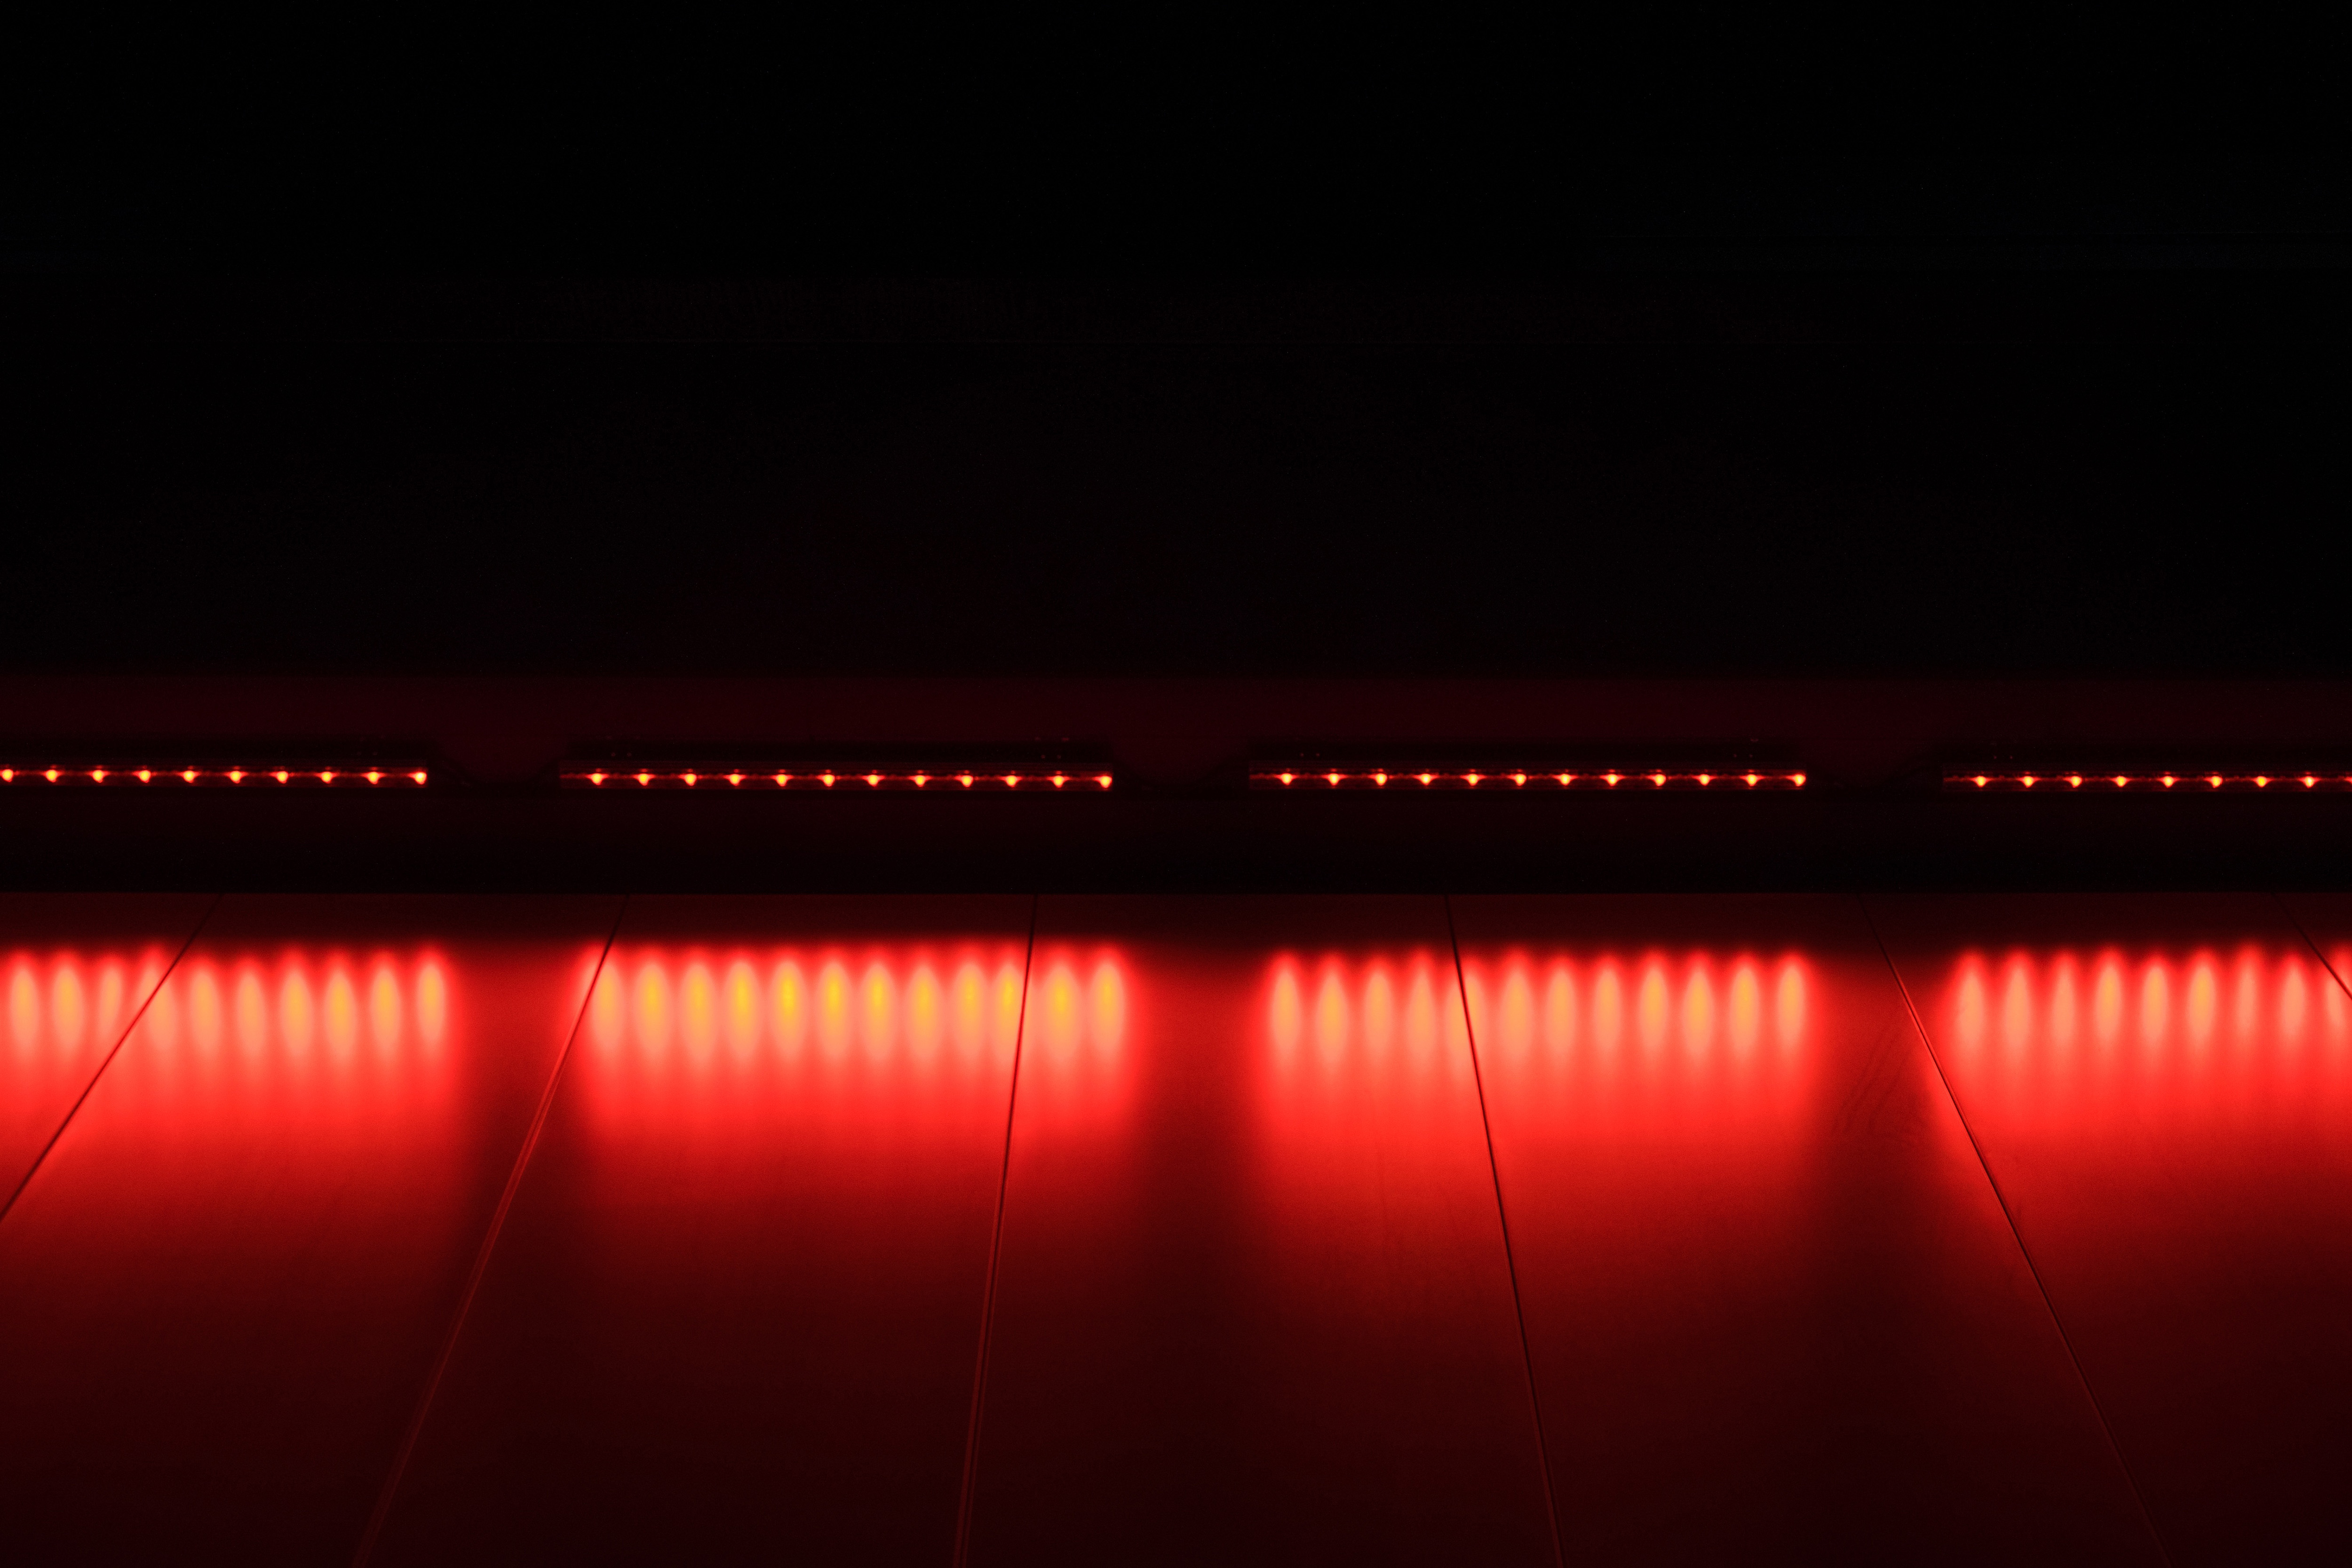  Red  Abstract  Lights  Free Stock Photo ISO Republic